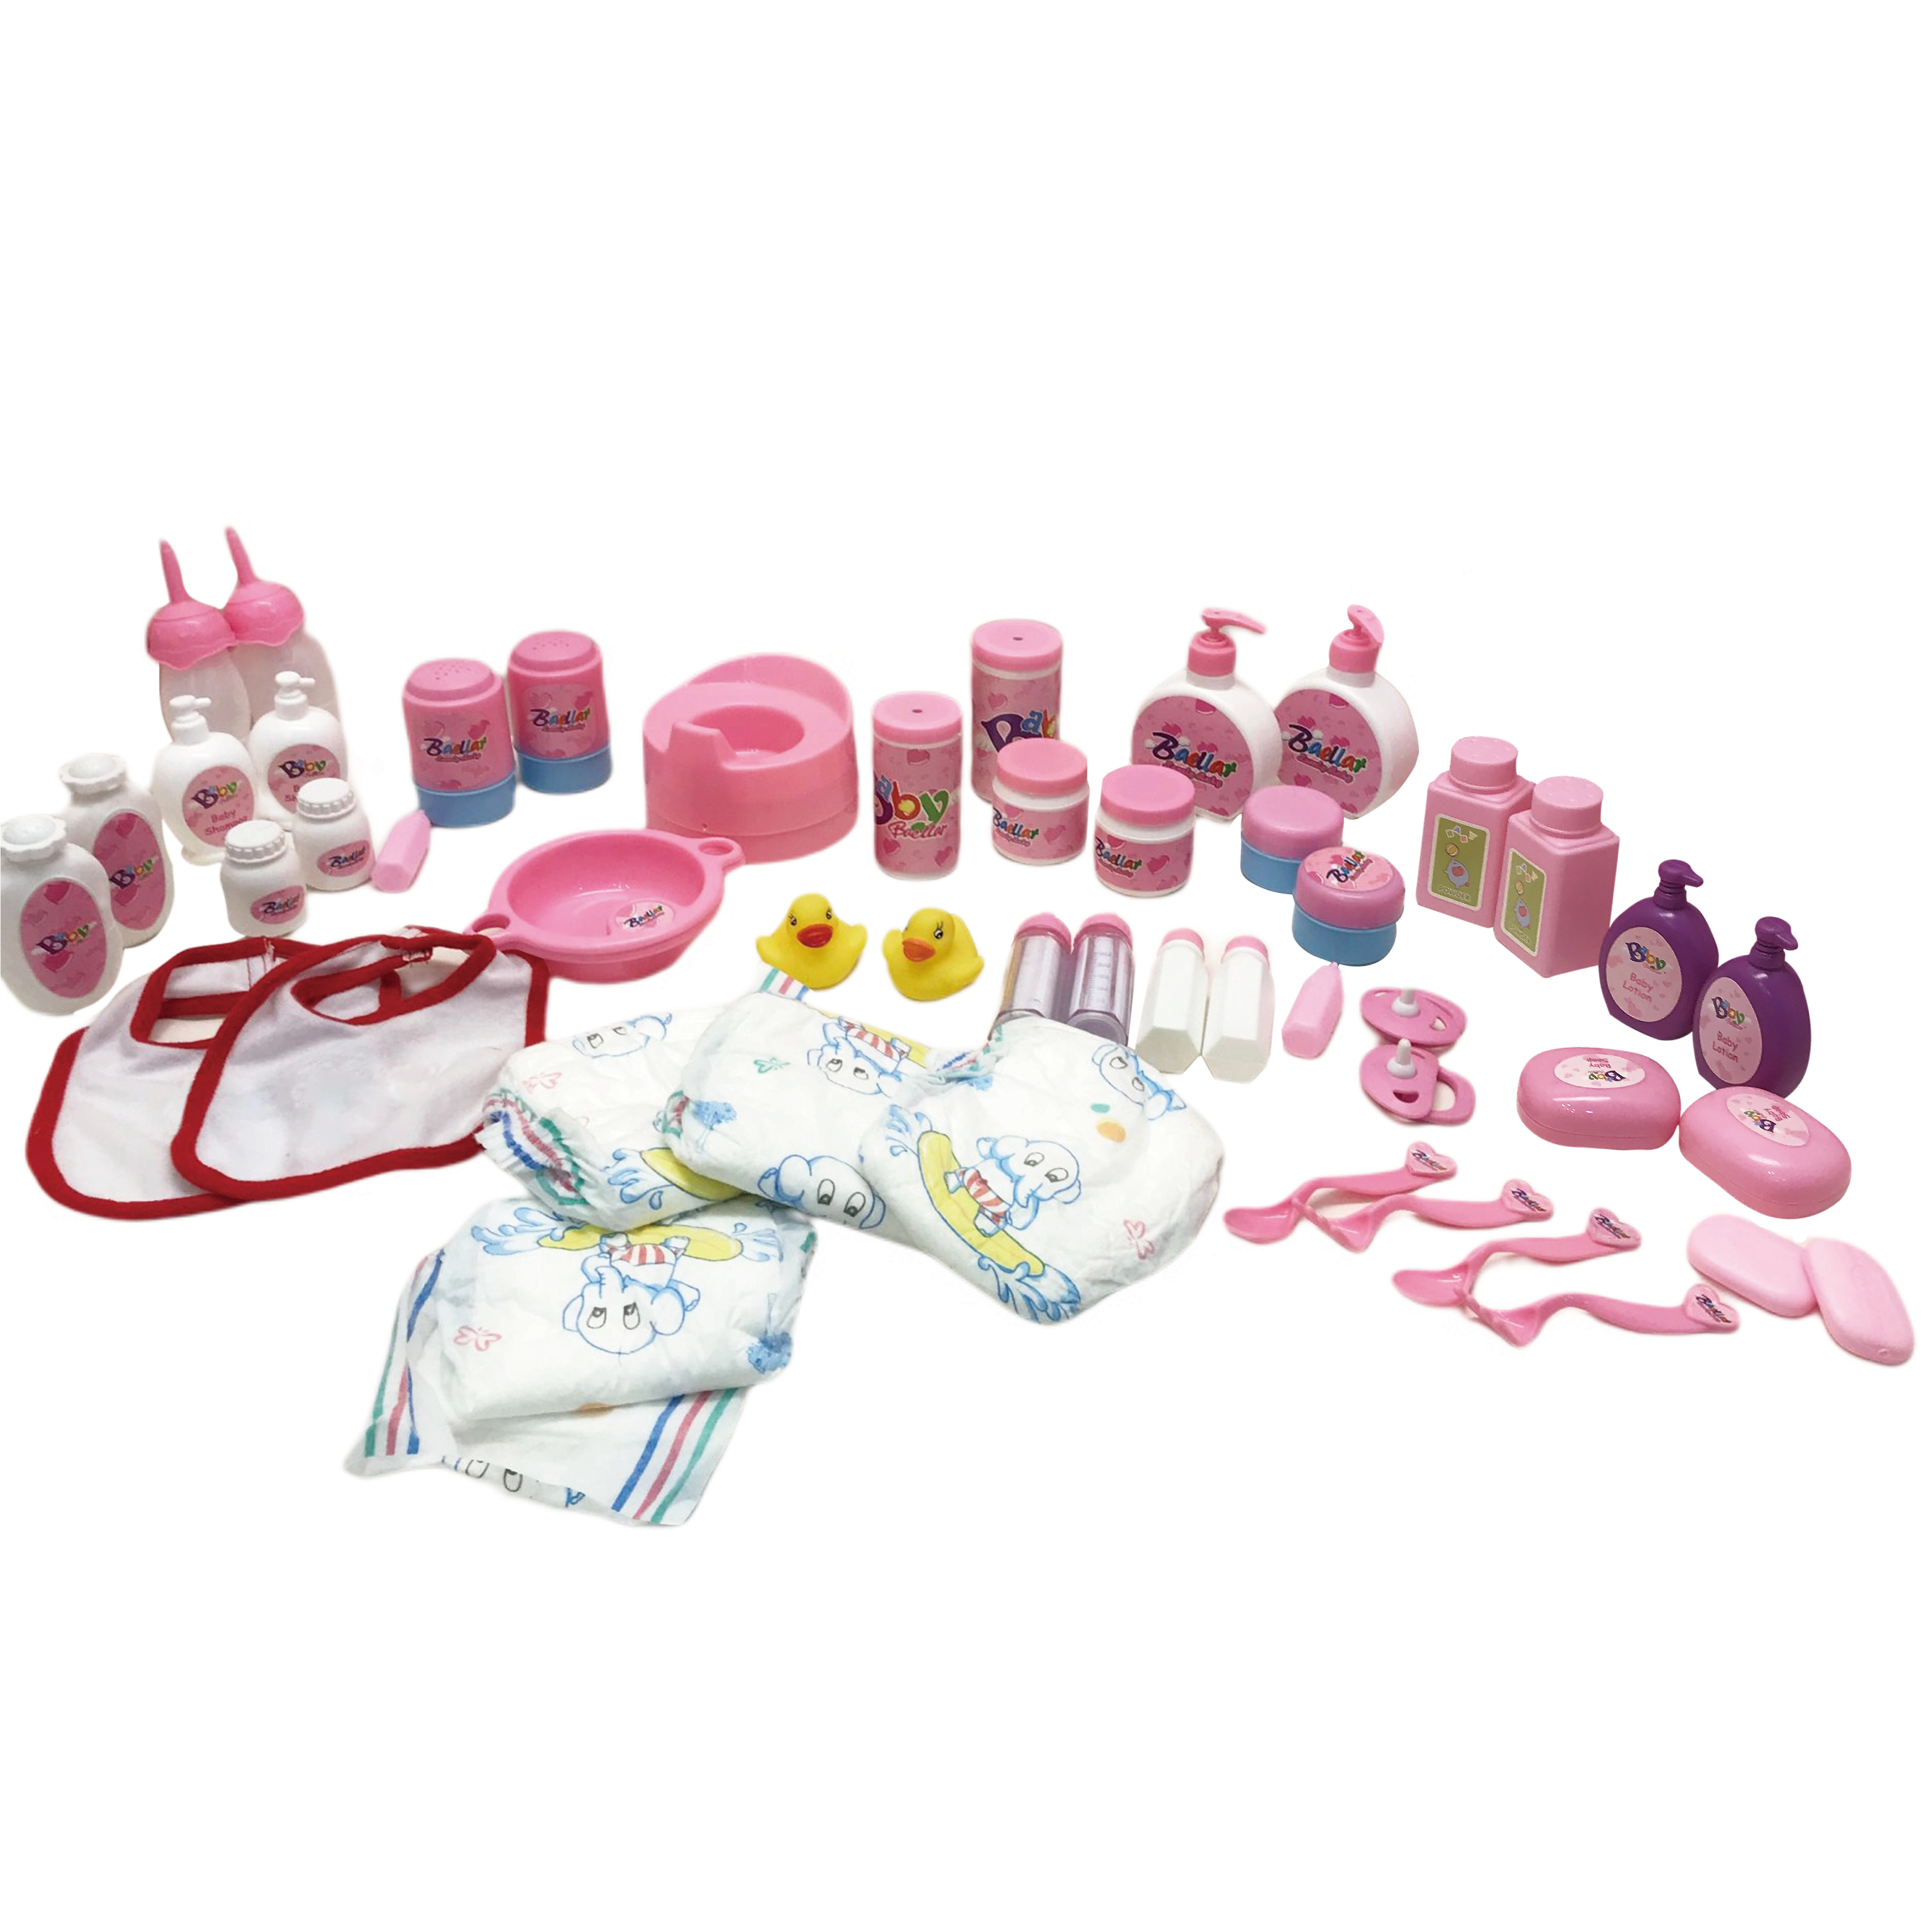 50pcs doll accesoires in bag